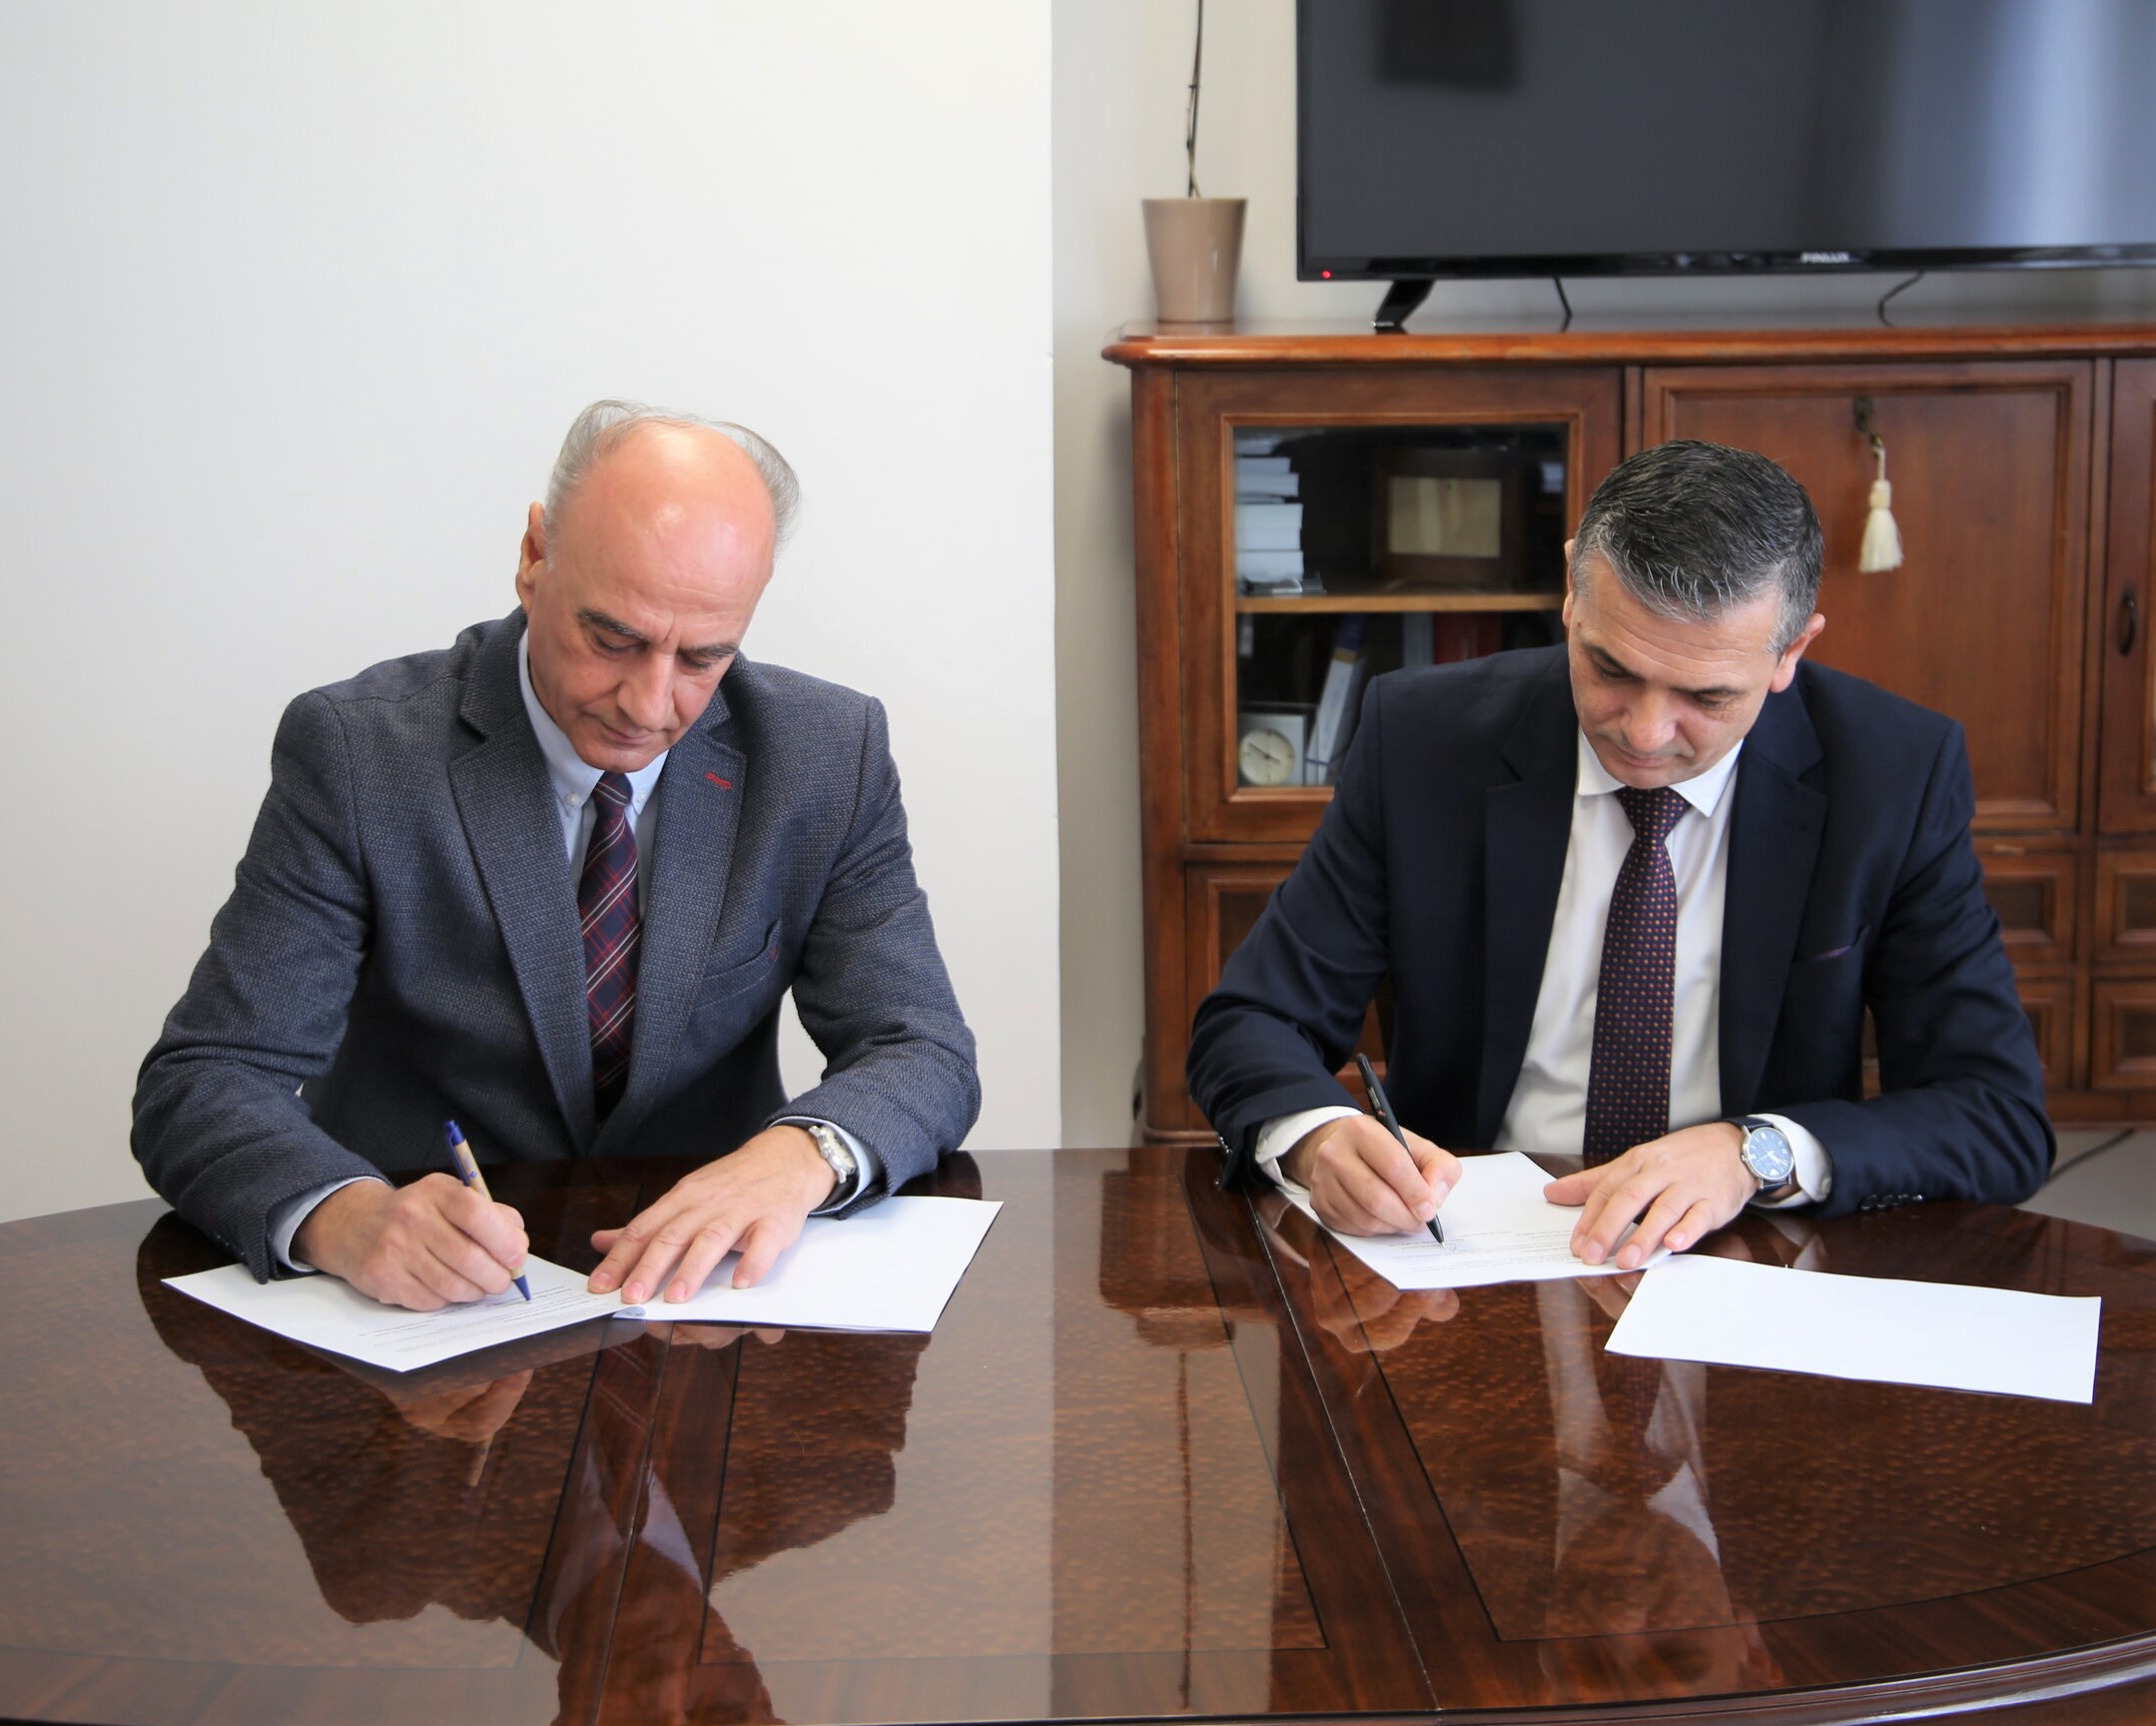 The Kosovo Prosecutorial Council and the Academy of Justice sign a memorandum of understanding